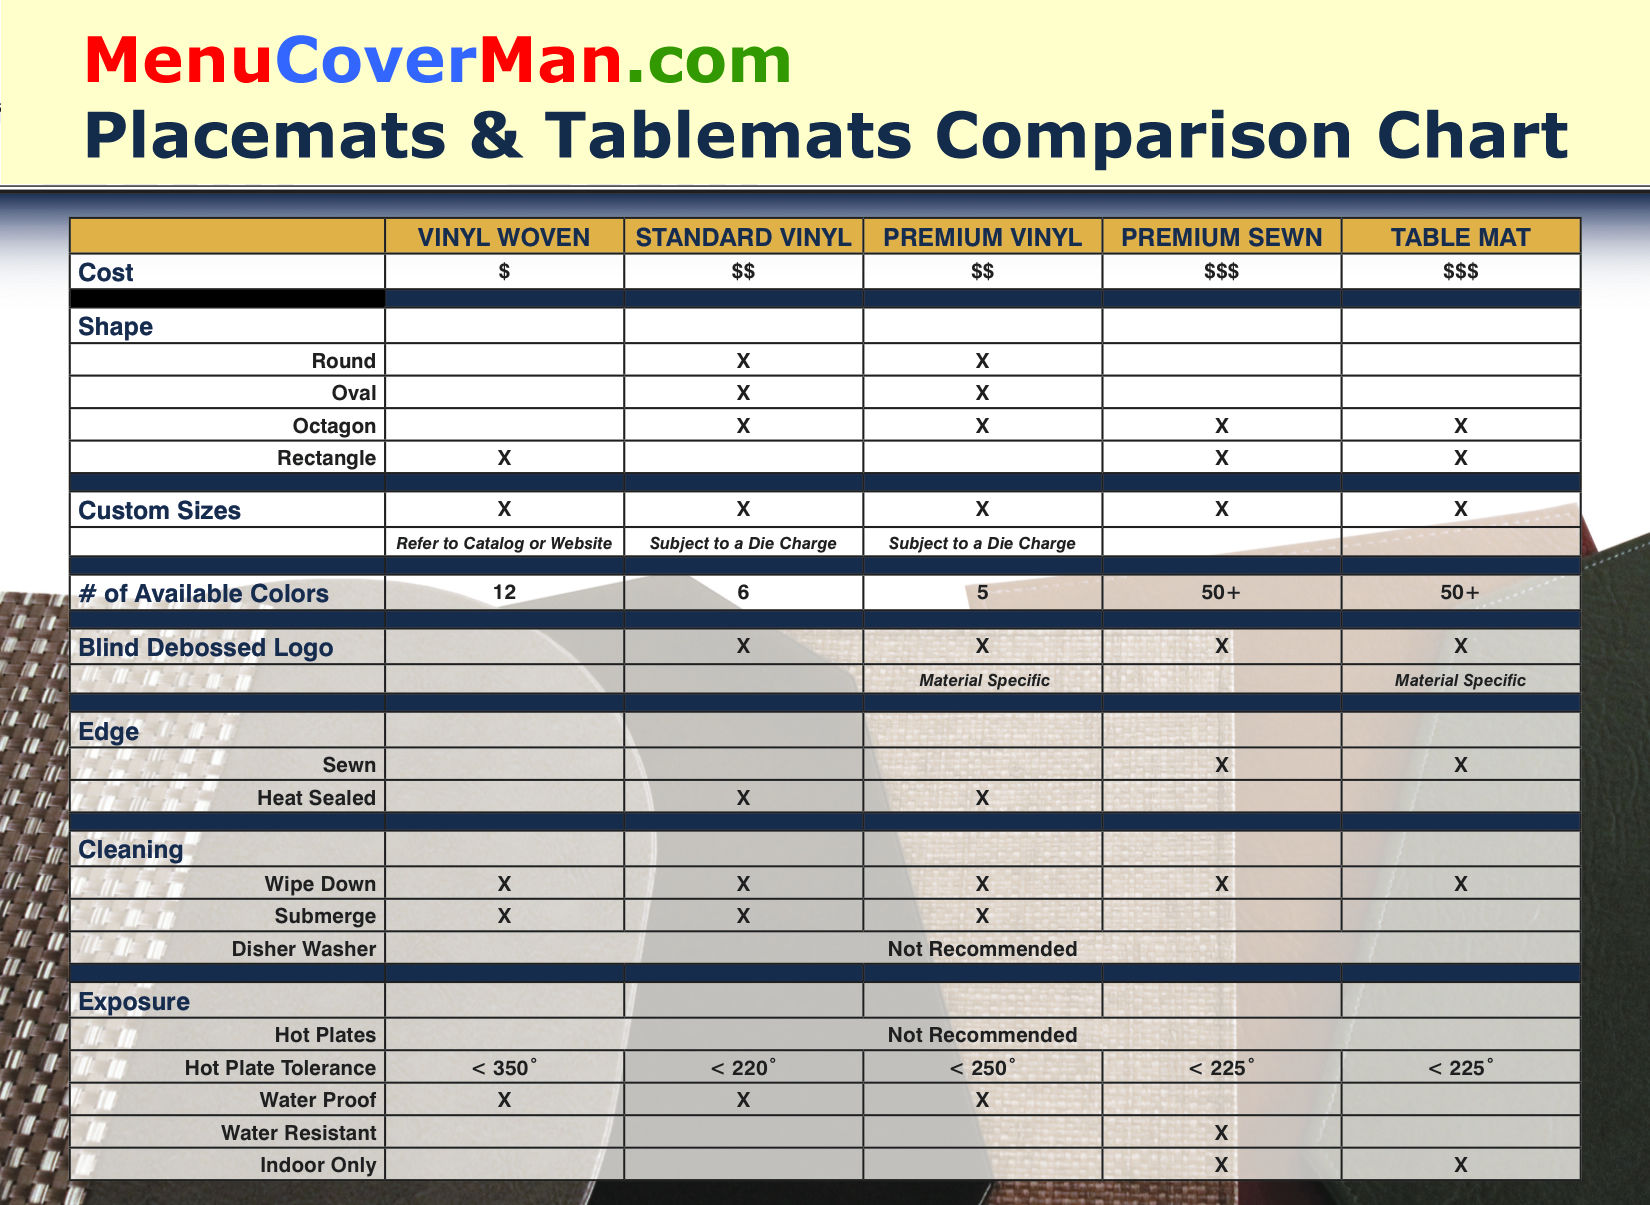 Placemats and tablemats feature comparison chart.